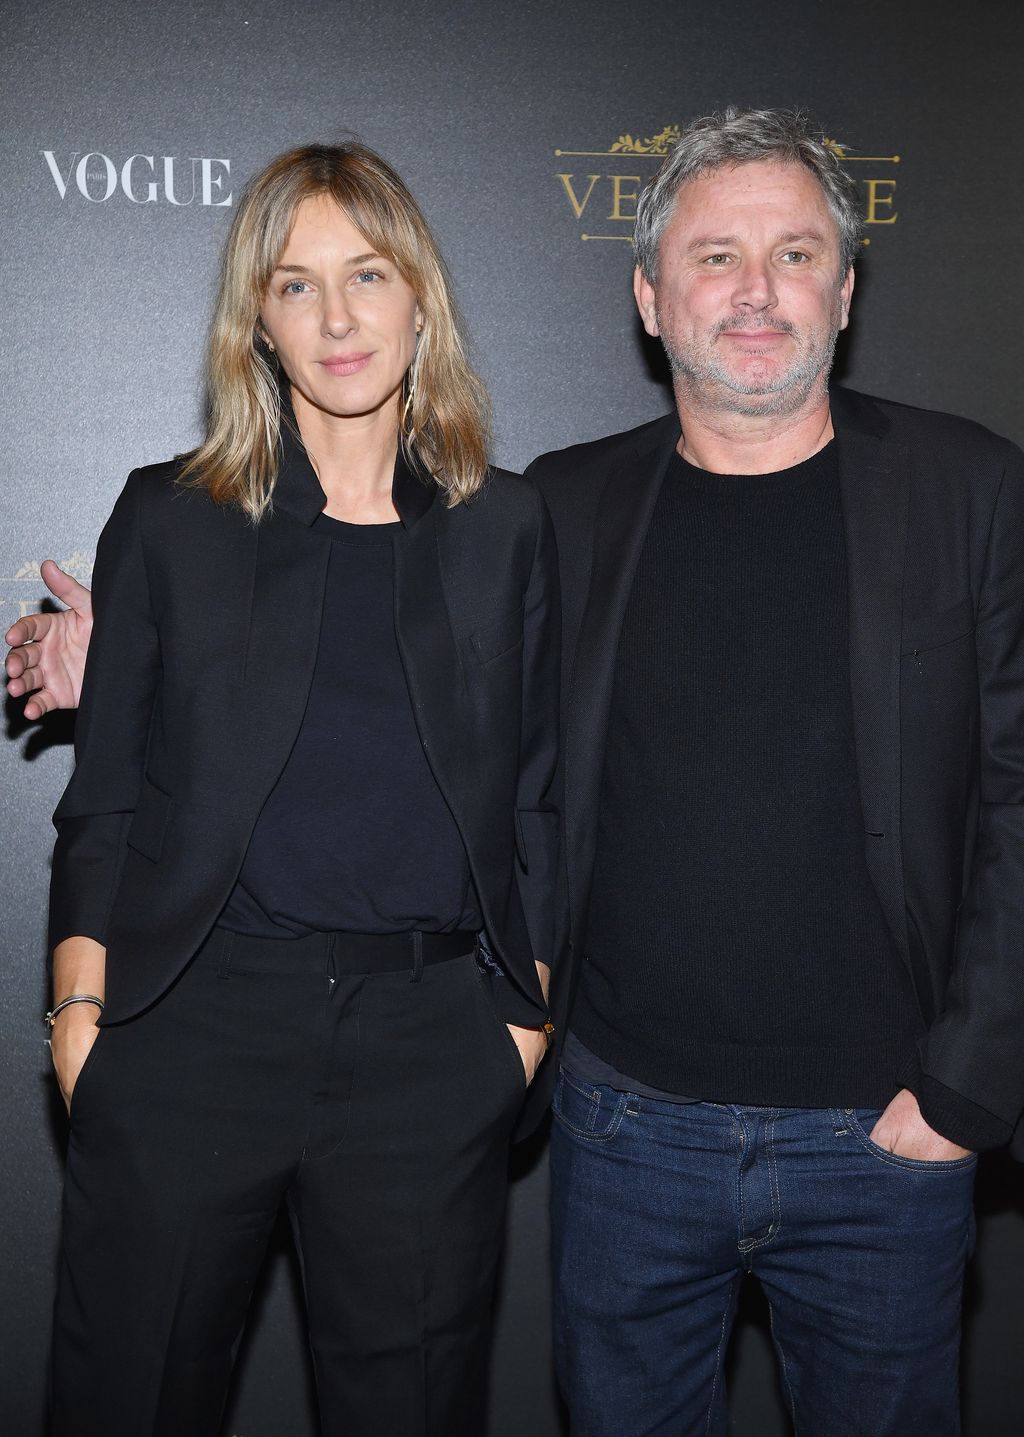 PARIS, FRANCE - OCTOBER 01:  Thierry Gillier (R) and Cecilia Bonstrom (Photo by Pascal Le Segretain/Getty Images)